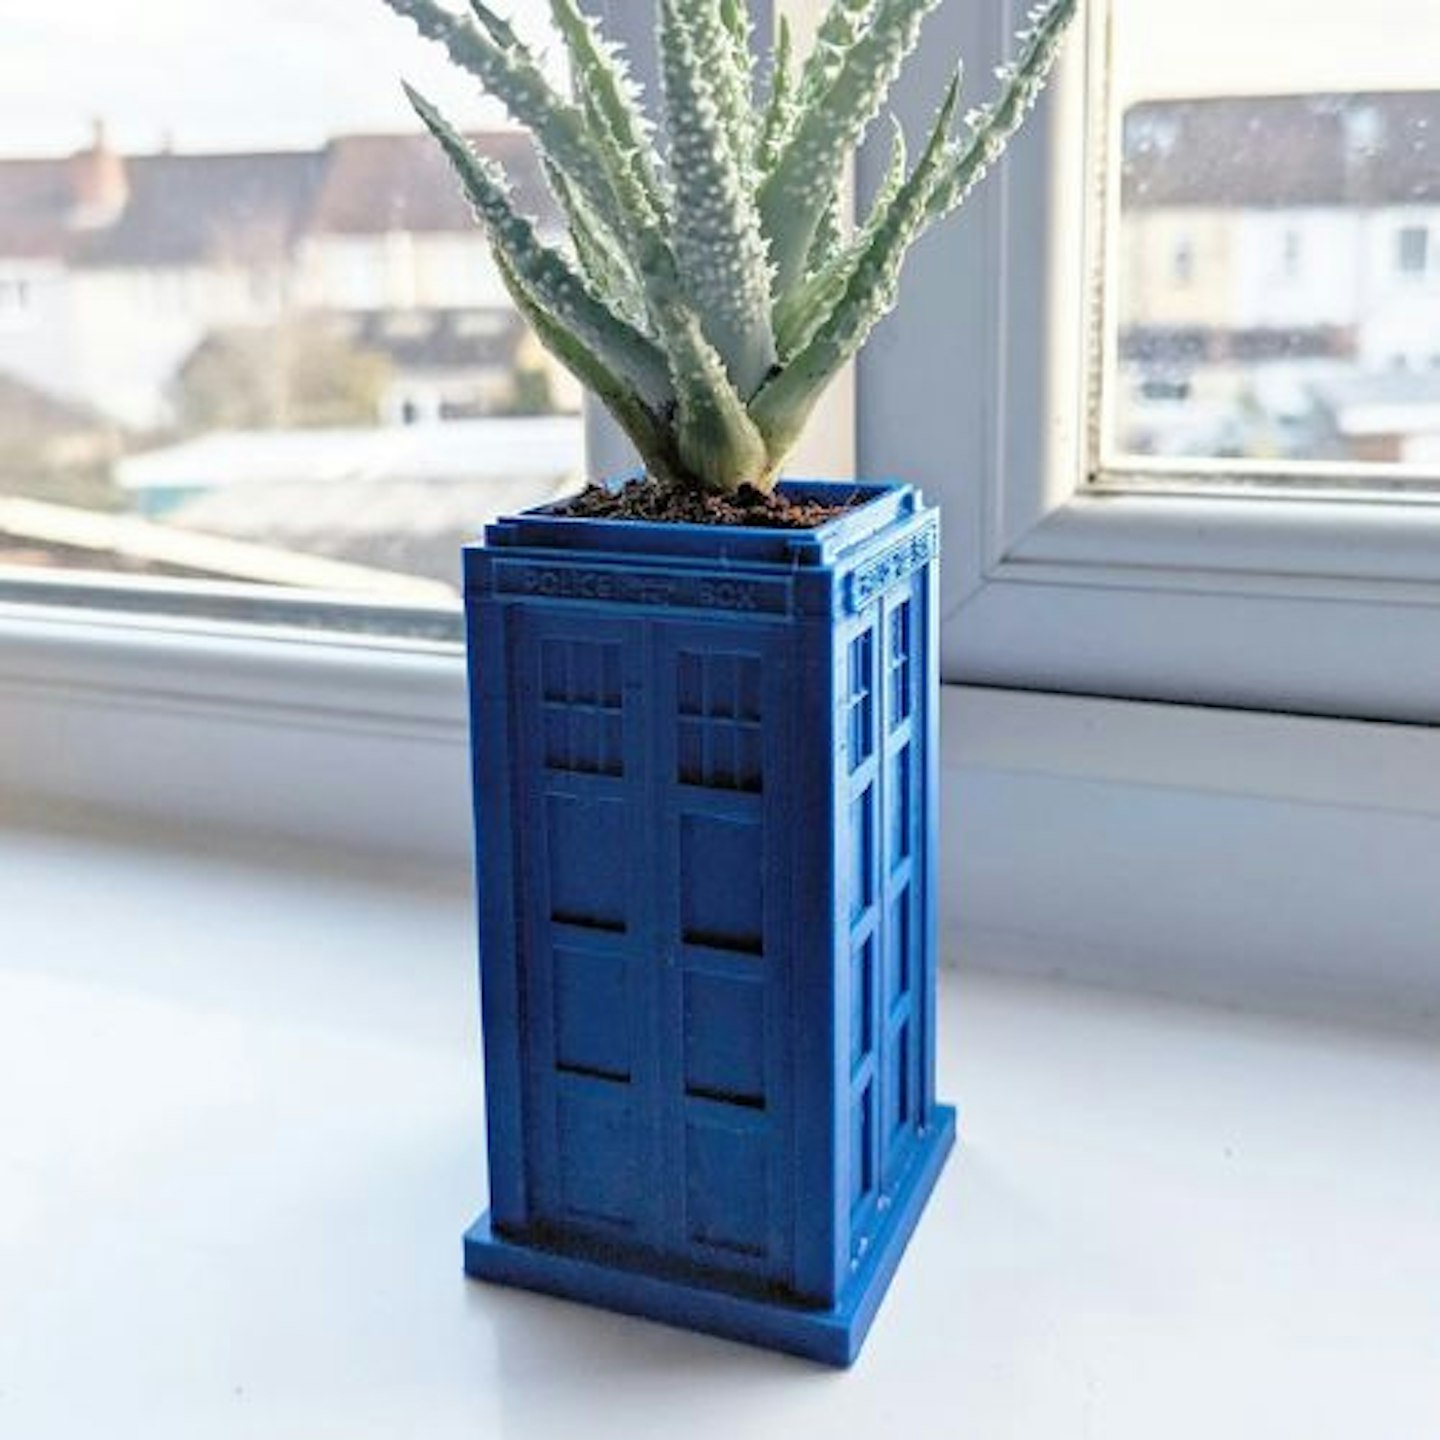 Doctor Who Inspired 3D Printed Planter